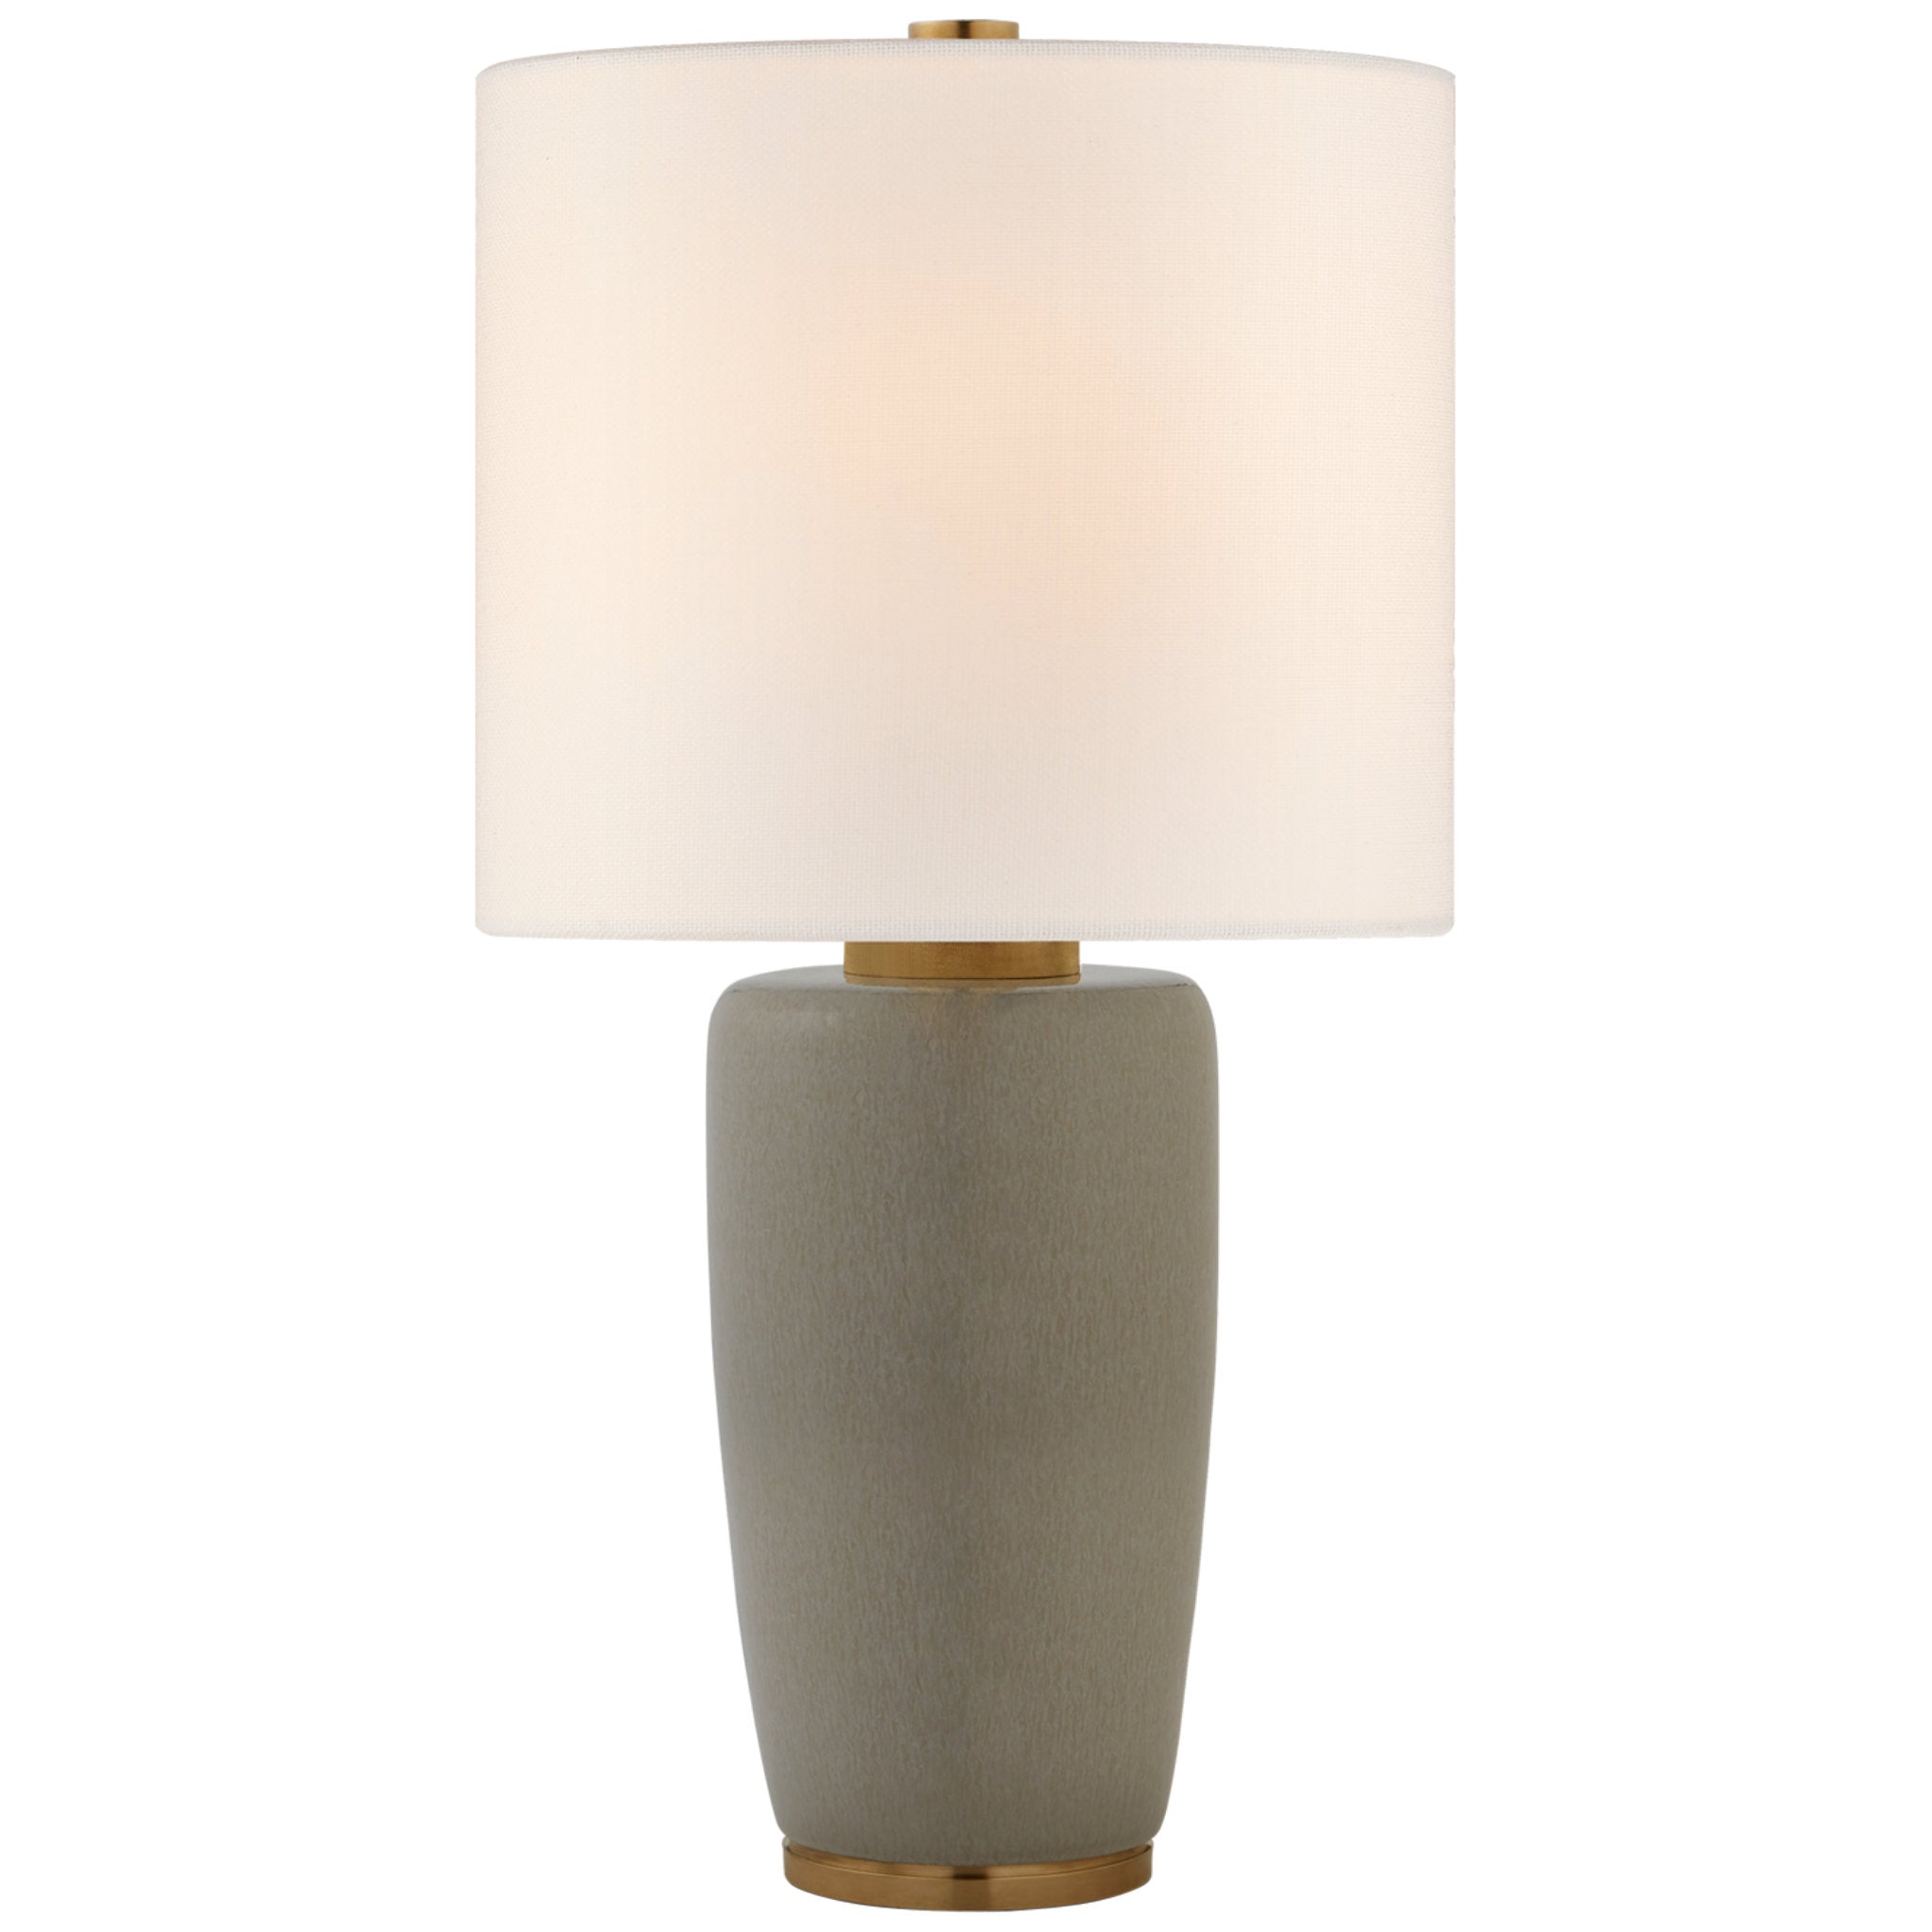 Barbara Barry Chado Large Table Lamp in Shellish Gray with Linen Shade